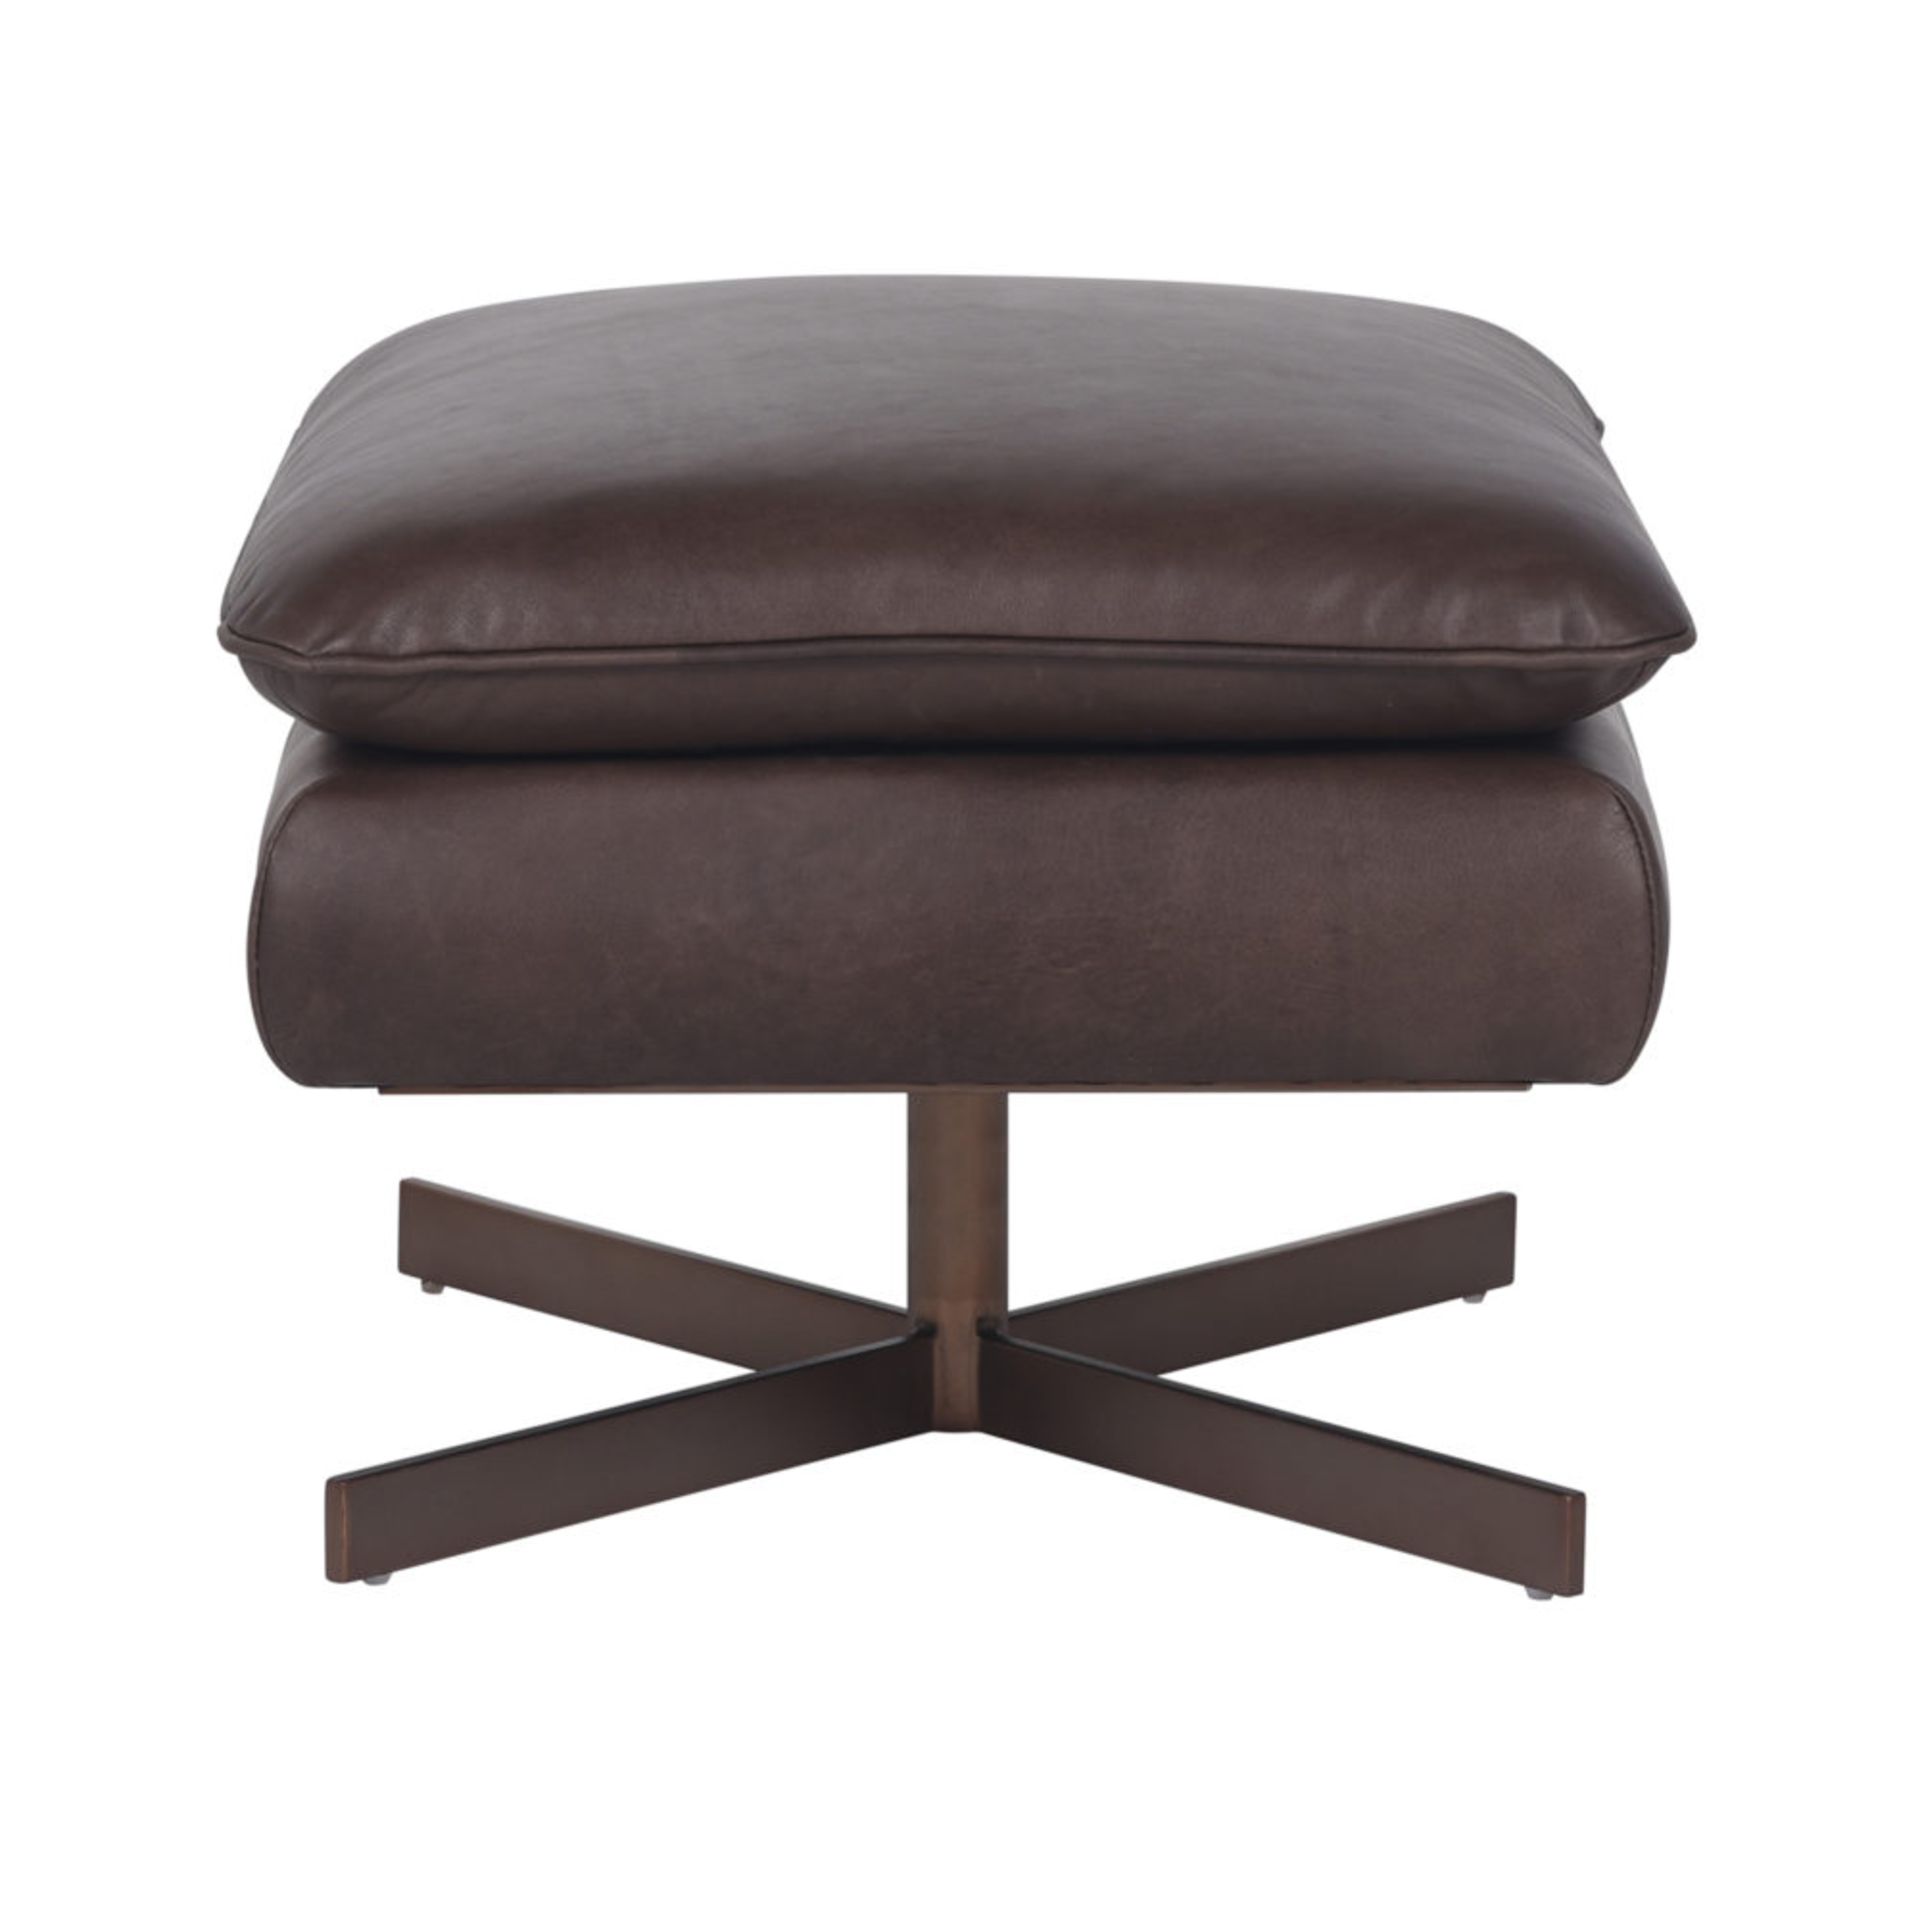 Bleu Nature Waki Footstool – F318 Iroquois Chocolate And Brushed Copper 64 x 55 x 42 cm RRP £1195 - Image 2 of 2